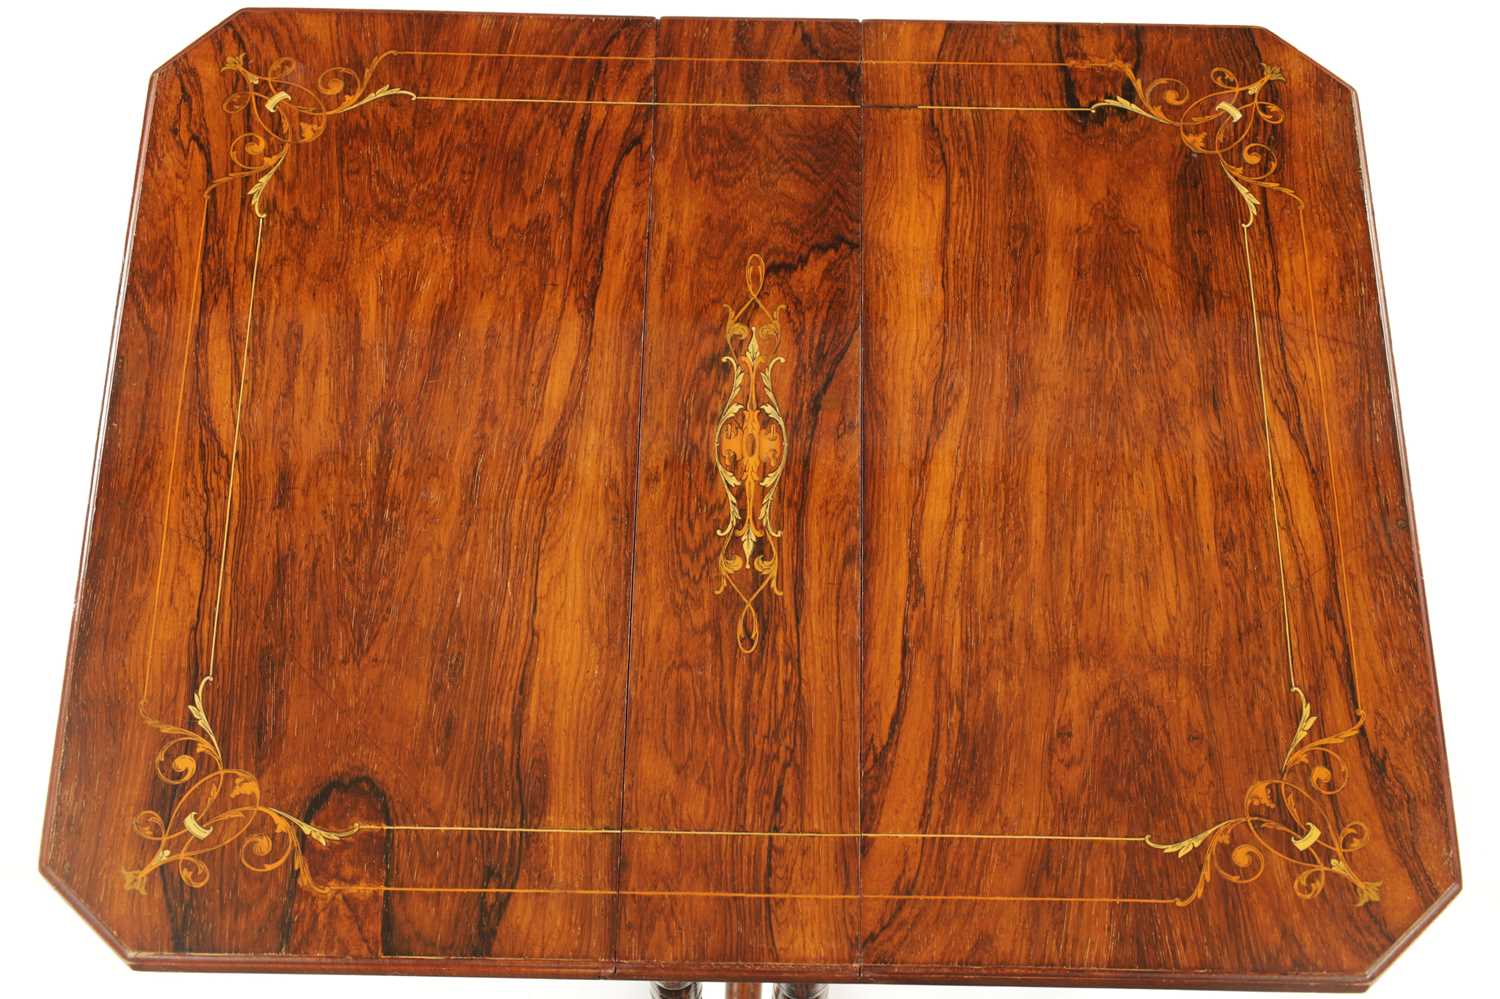 A 19TH CENTURY INLAID ROSEWOOD SUTHERLAND TABLE - Image 6 of 6